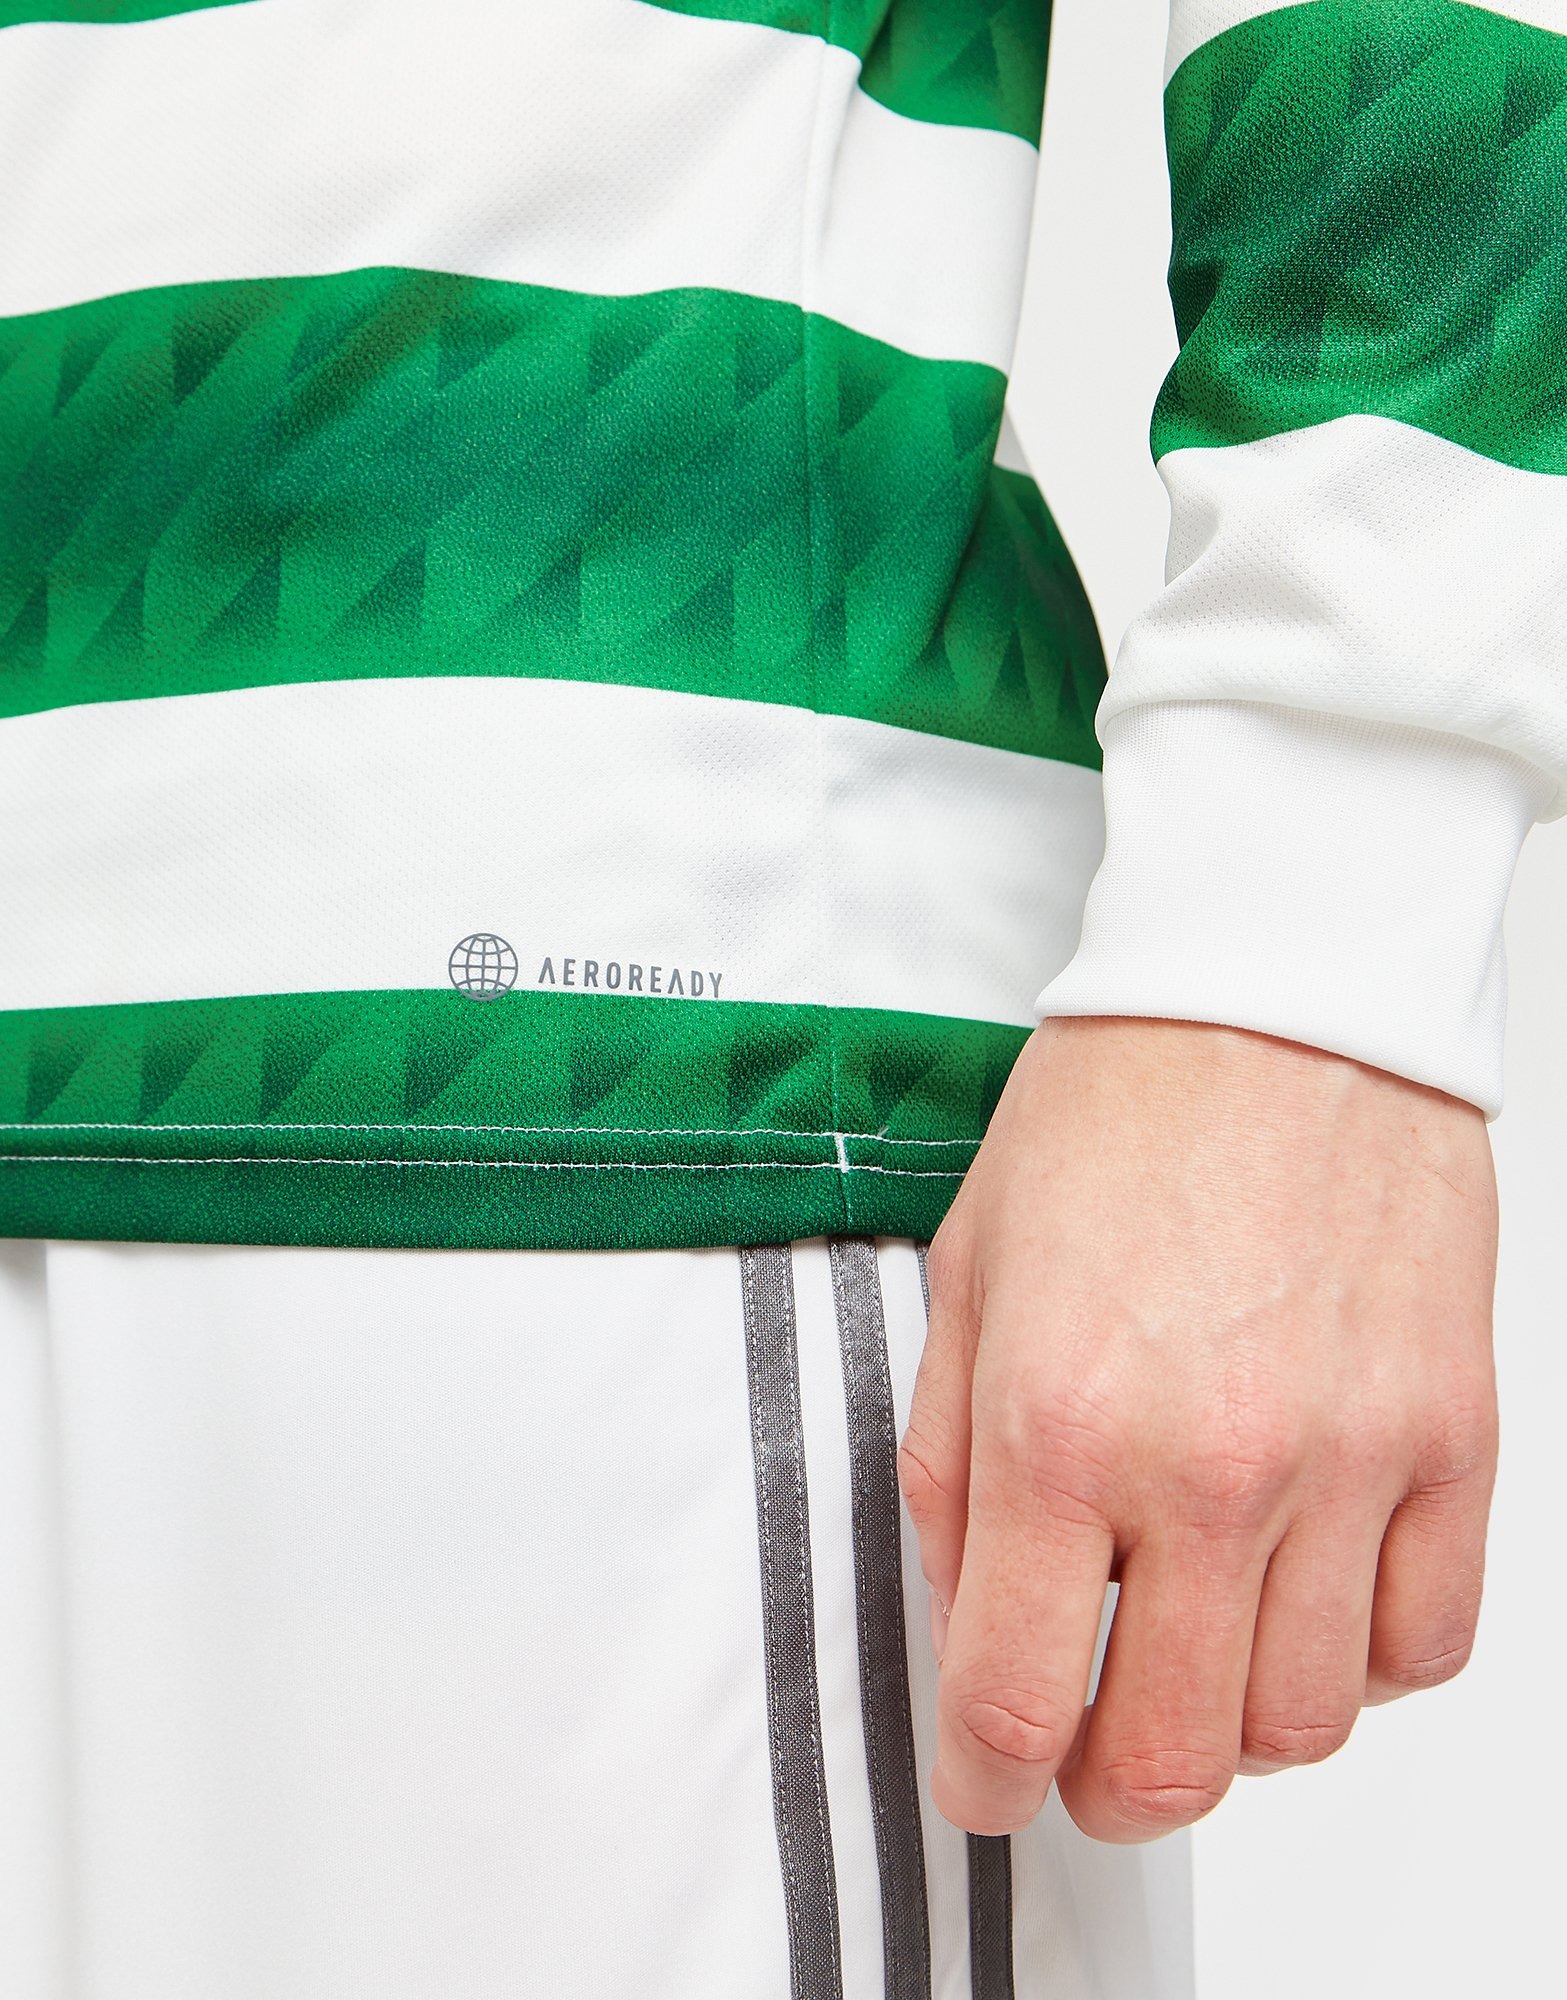 Japan Football - The new Celtic FC 2022/23 home kit is here 🍀😁